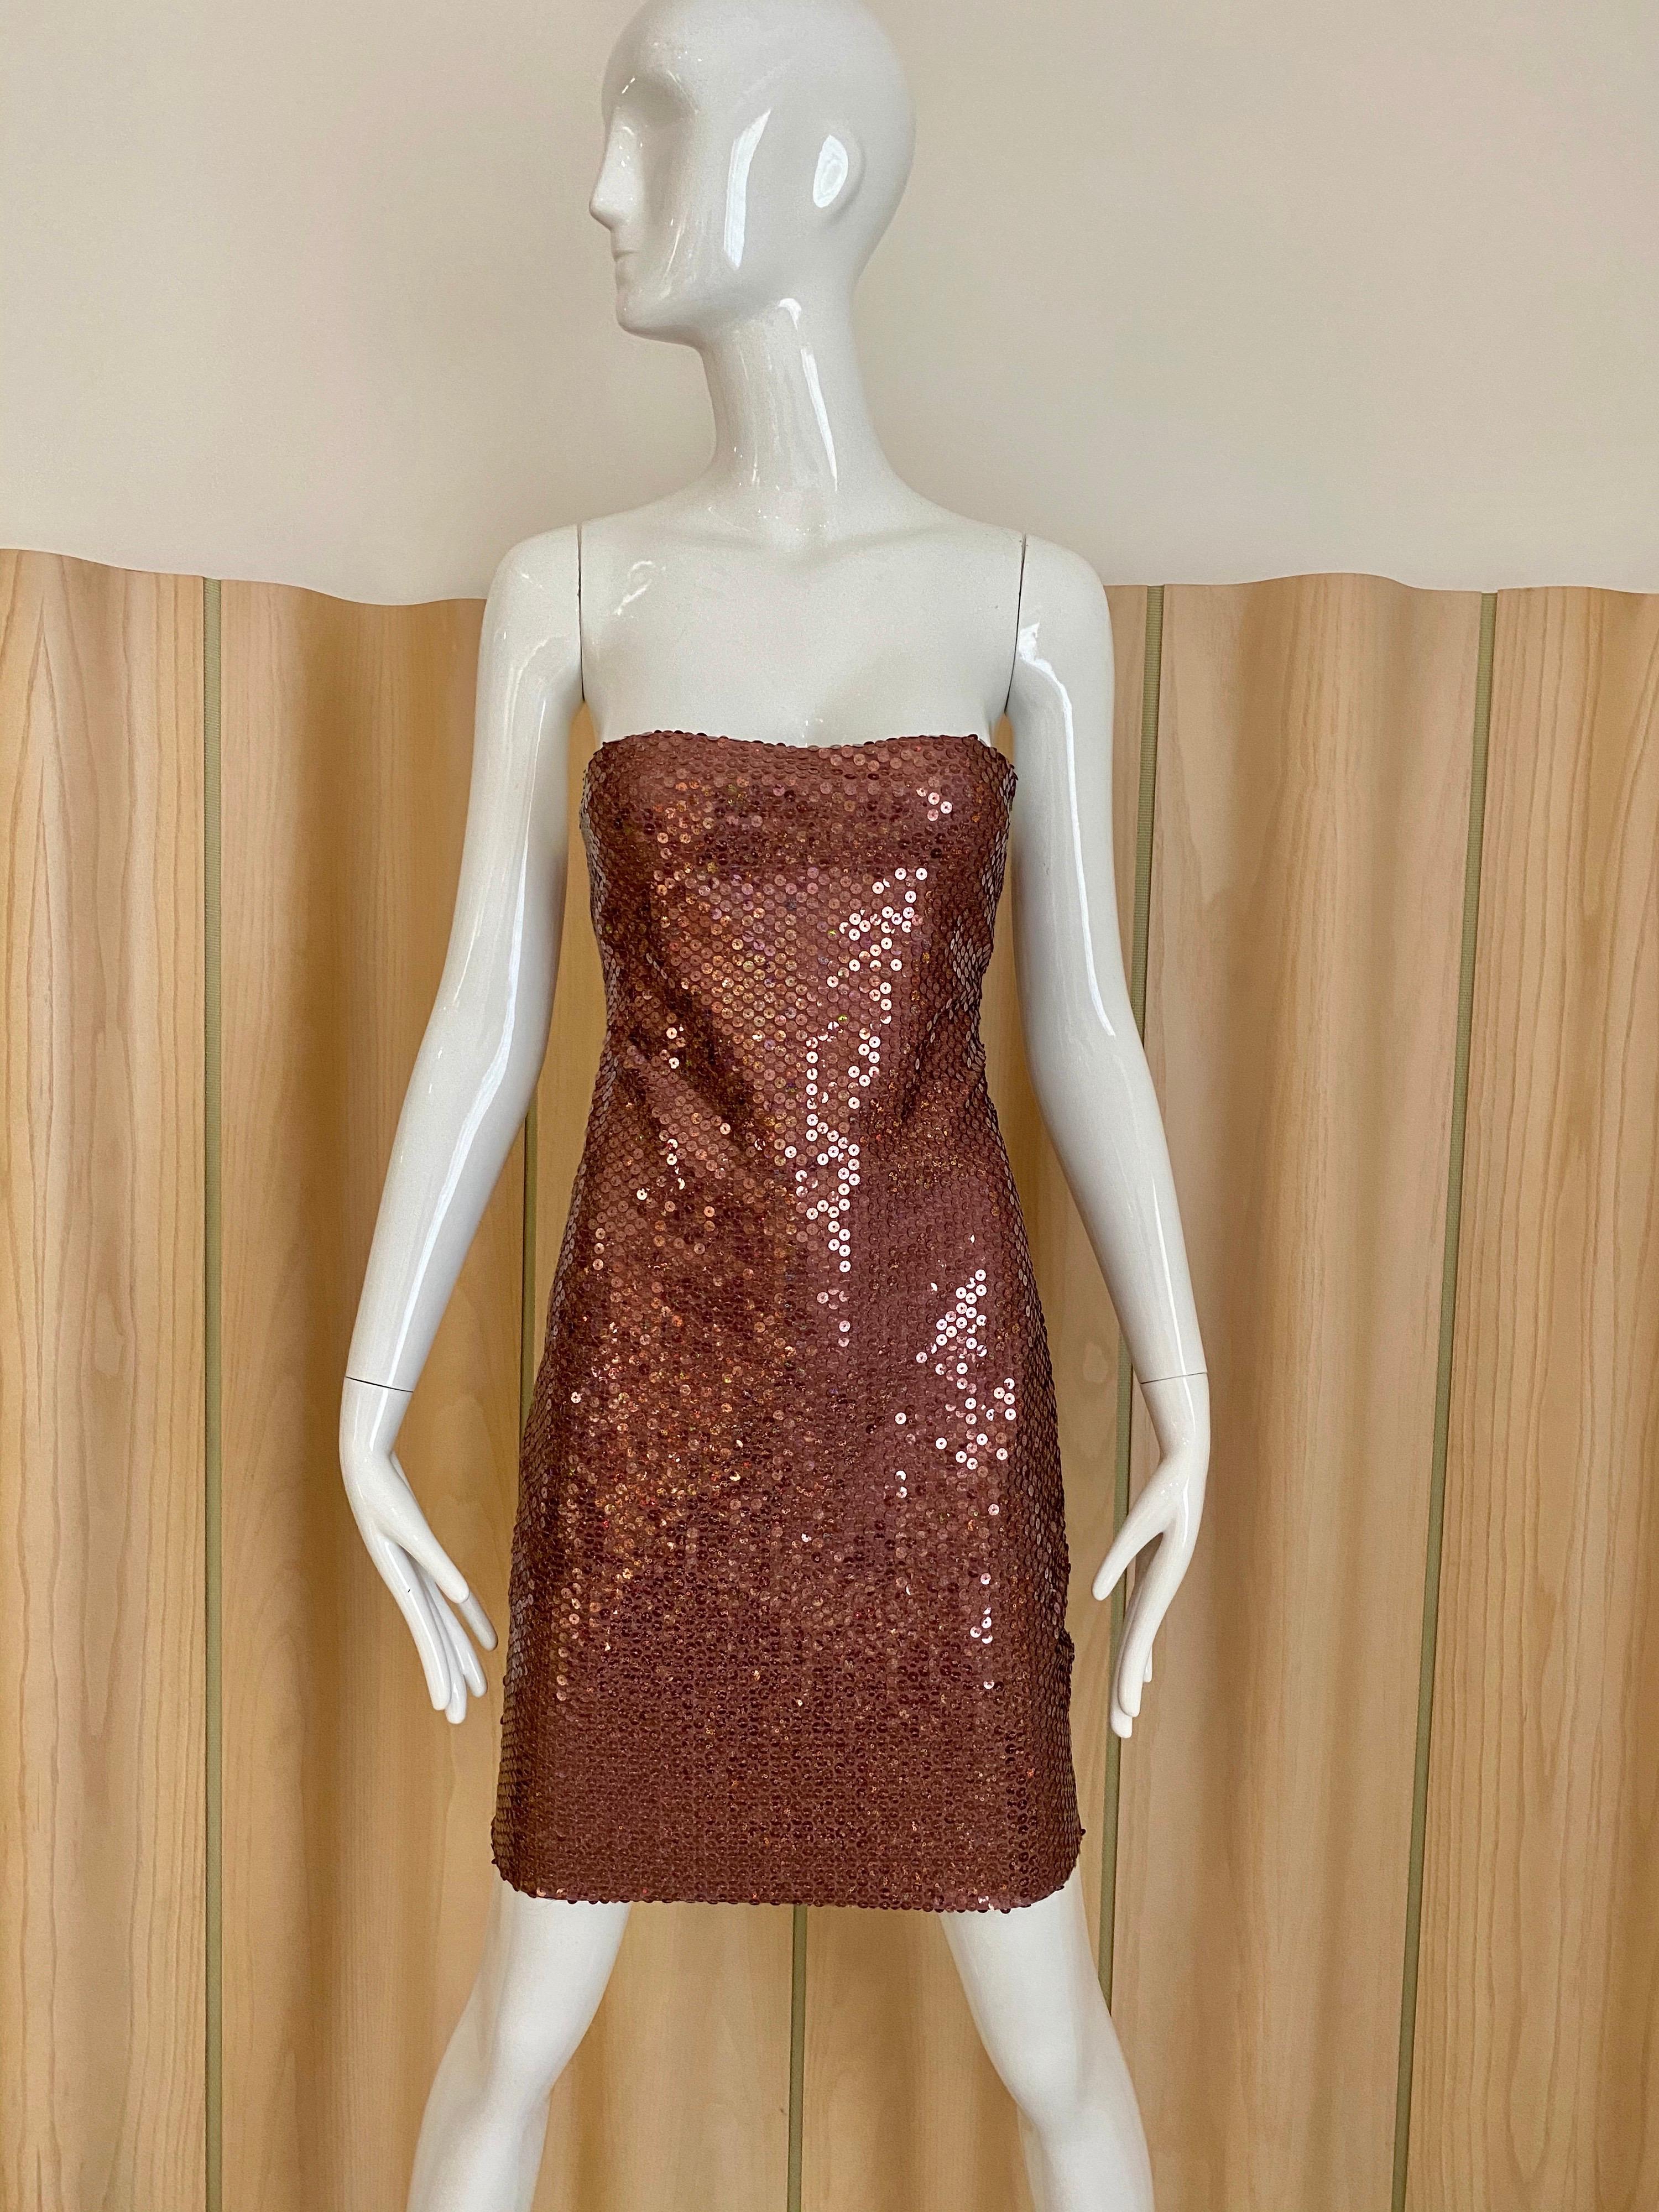 1990s Loris Azzaro brown sequin metallic strapless cocktail party dress.
fit size 4